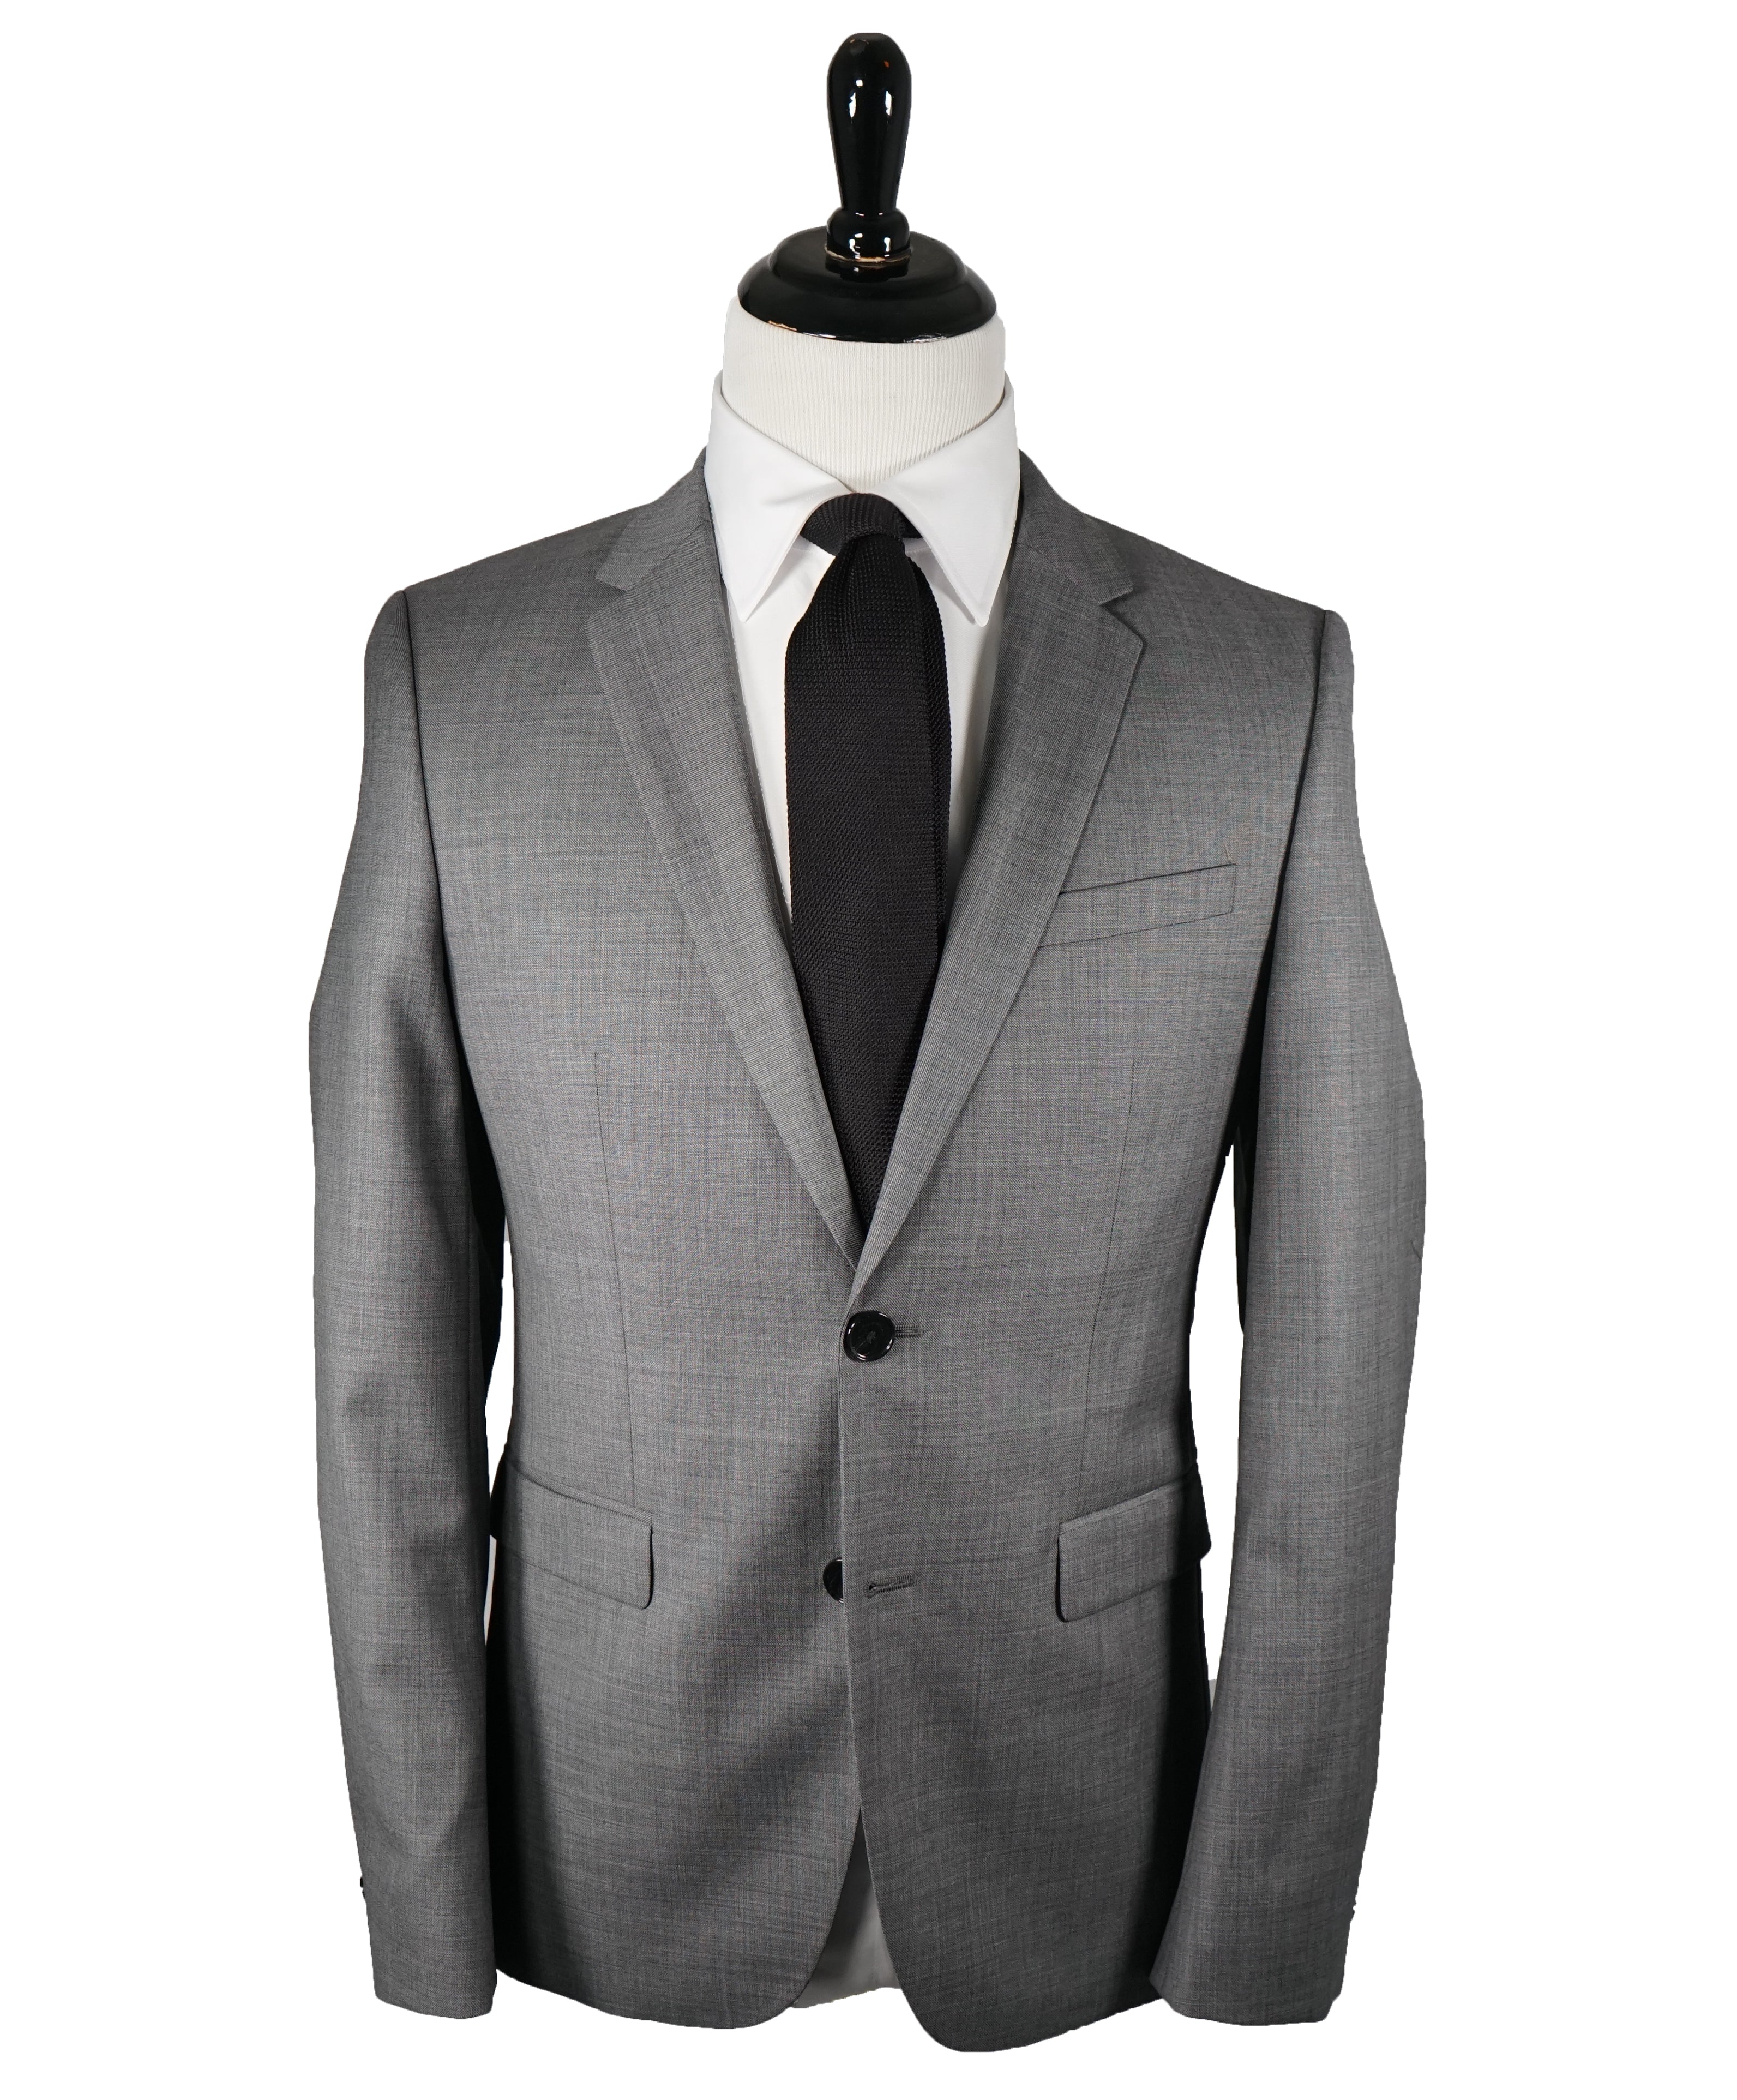 hugo boss marzotto OFF 51% - Online Shopping Site for Fashion \u0026 Lifestyle.